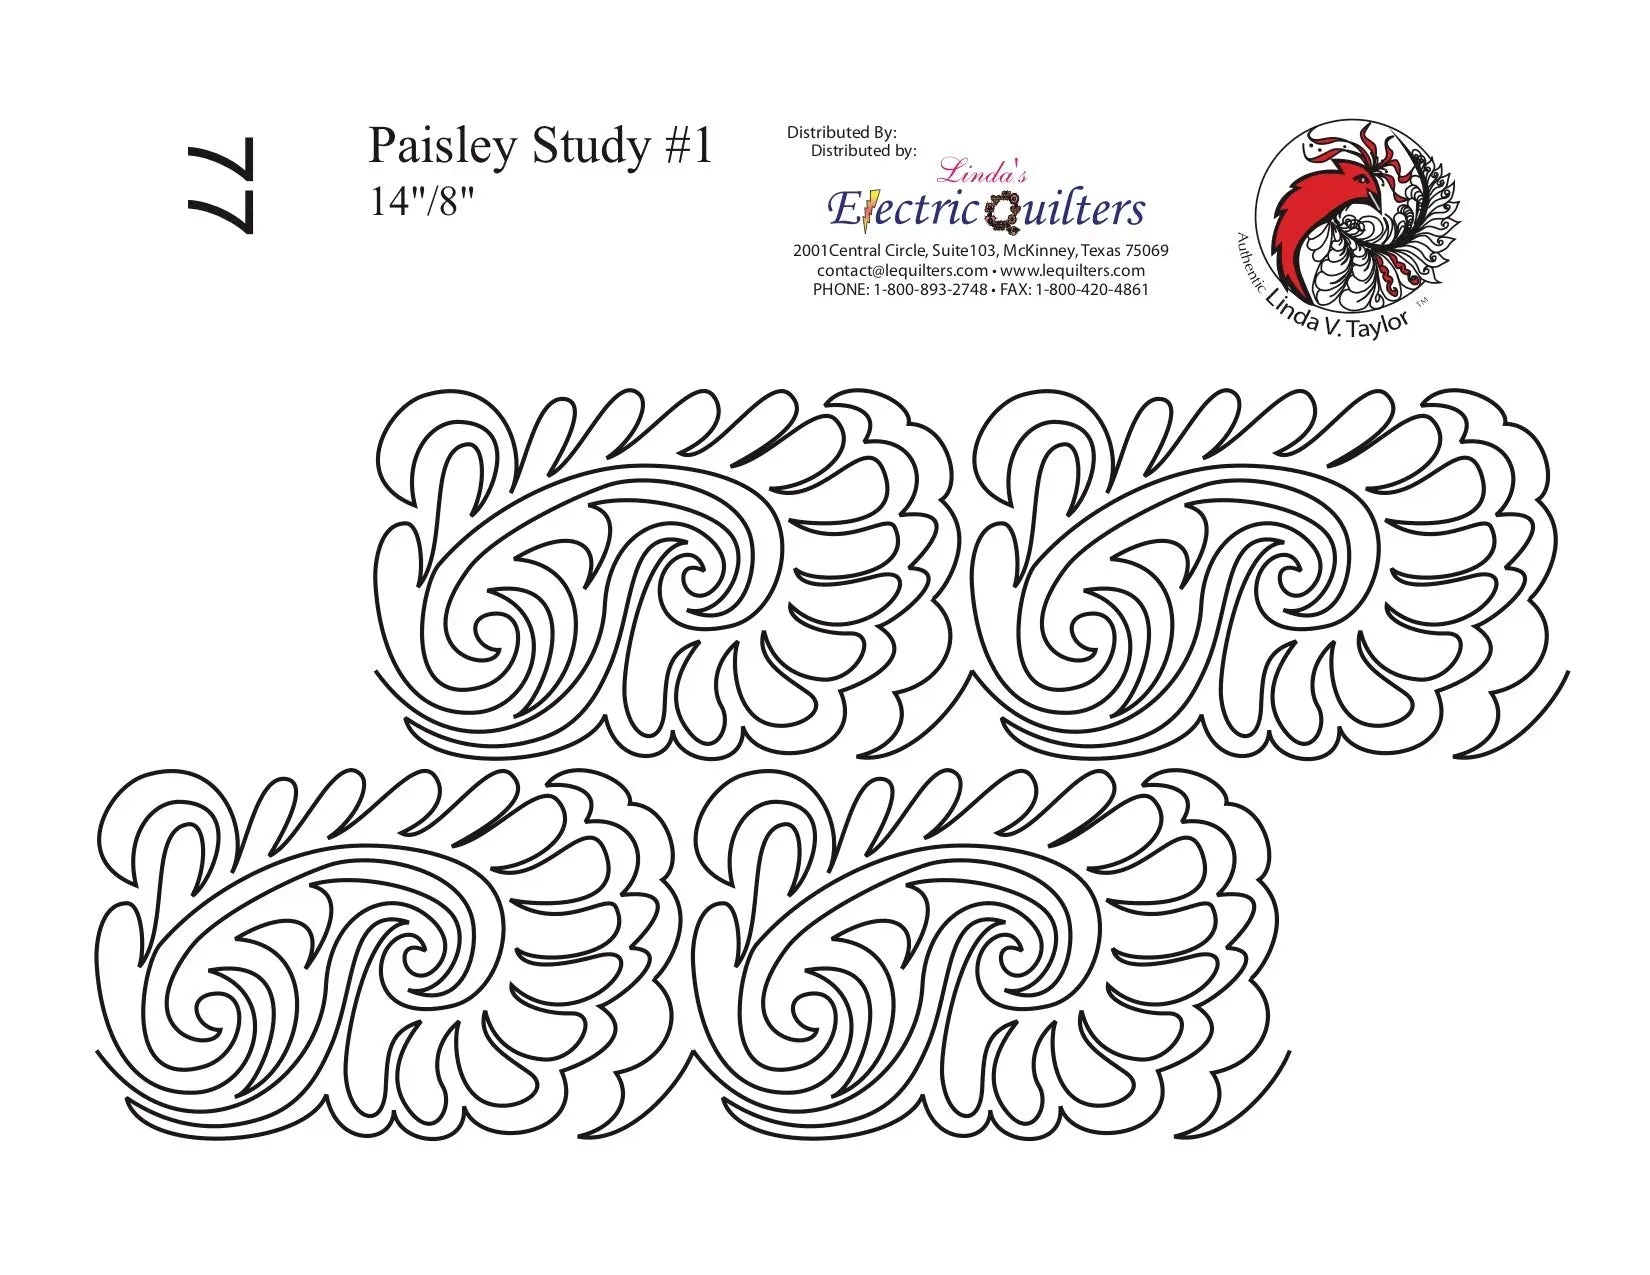 077 Paisley Study #1 Pantograph by Linda V. Taylor - Linda's Electric Quilters